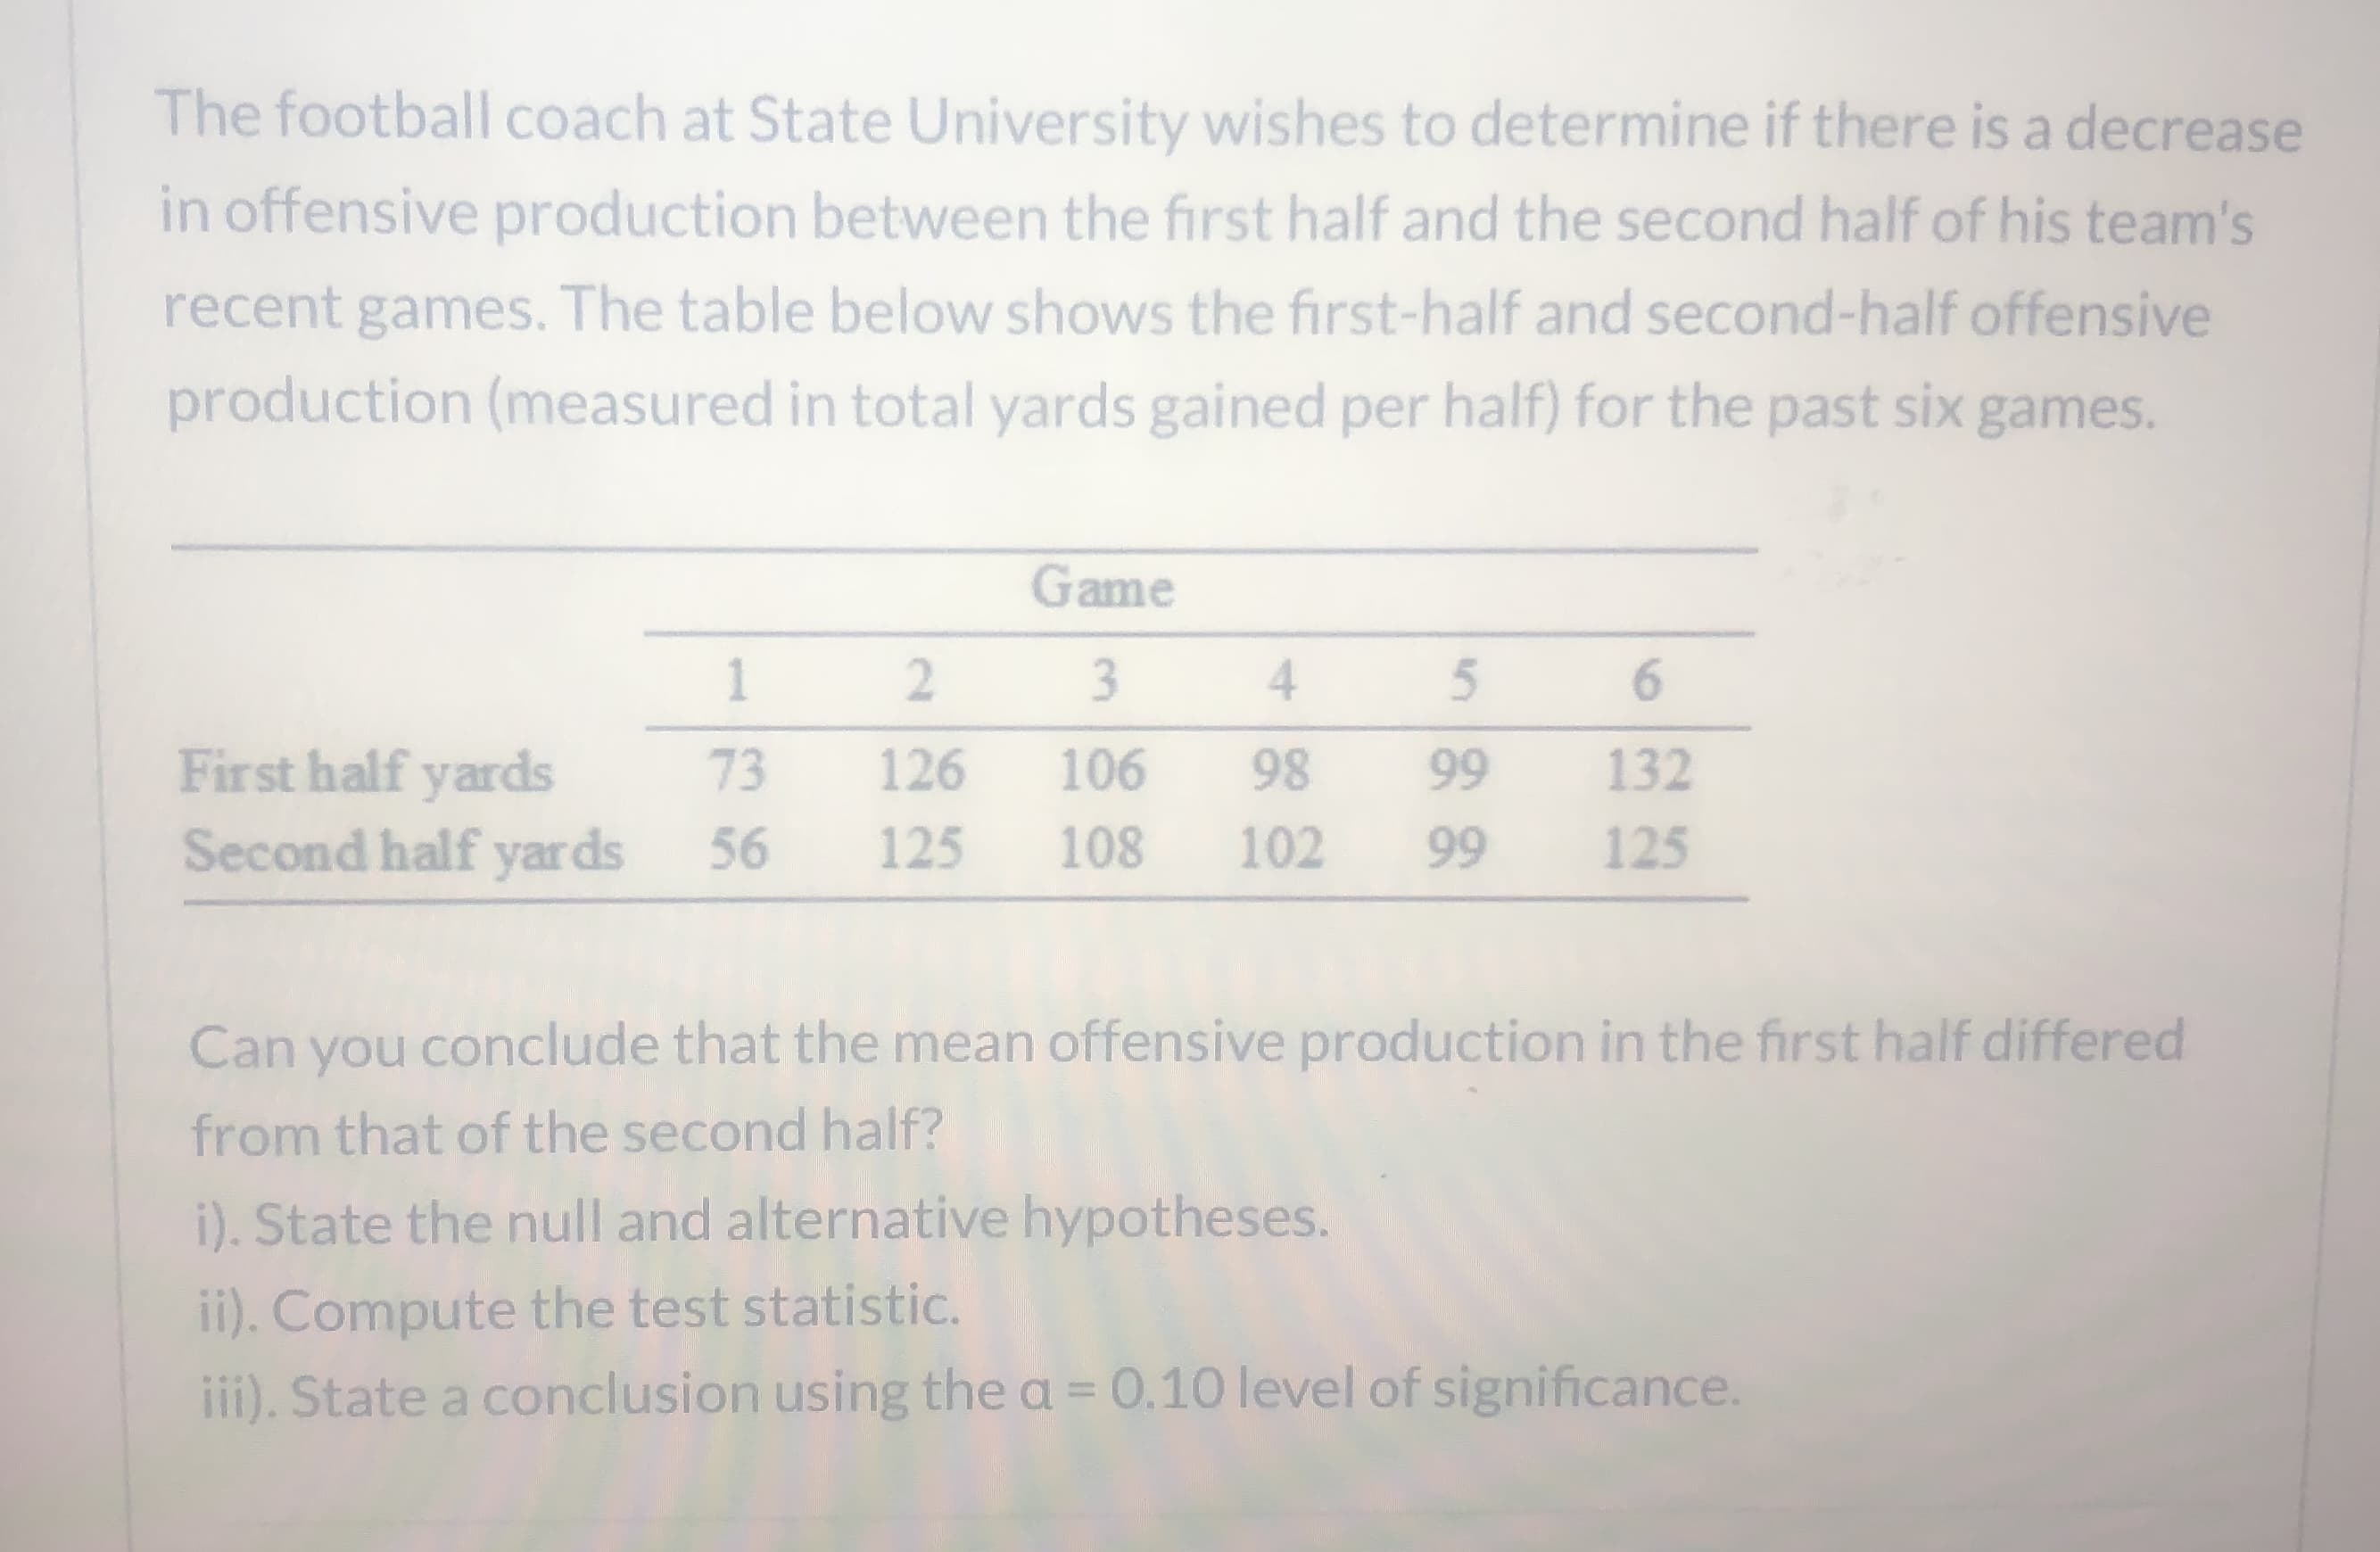 The football coach at State University wishes to determine if there is a decrease
in offensive production between the first half and the second half of his team's
recent games. The table below shows the first-half and second-half offensive
production (measured in total yards gained per half) for the past six games.
Game
1
4
6.
First half yards
Second half yards
73
126
106
98
99
132
56
125
108
102
99
125
Can you conclude that the mean offensive production in the first half differed
from that of the second half?
i). State the null and alternative hypotheses.
ii). Compute the test statistic.
iii). State a conclusion using the a = 0.10 level of significance.
